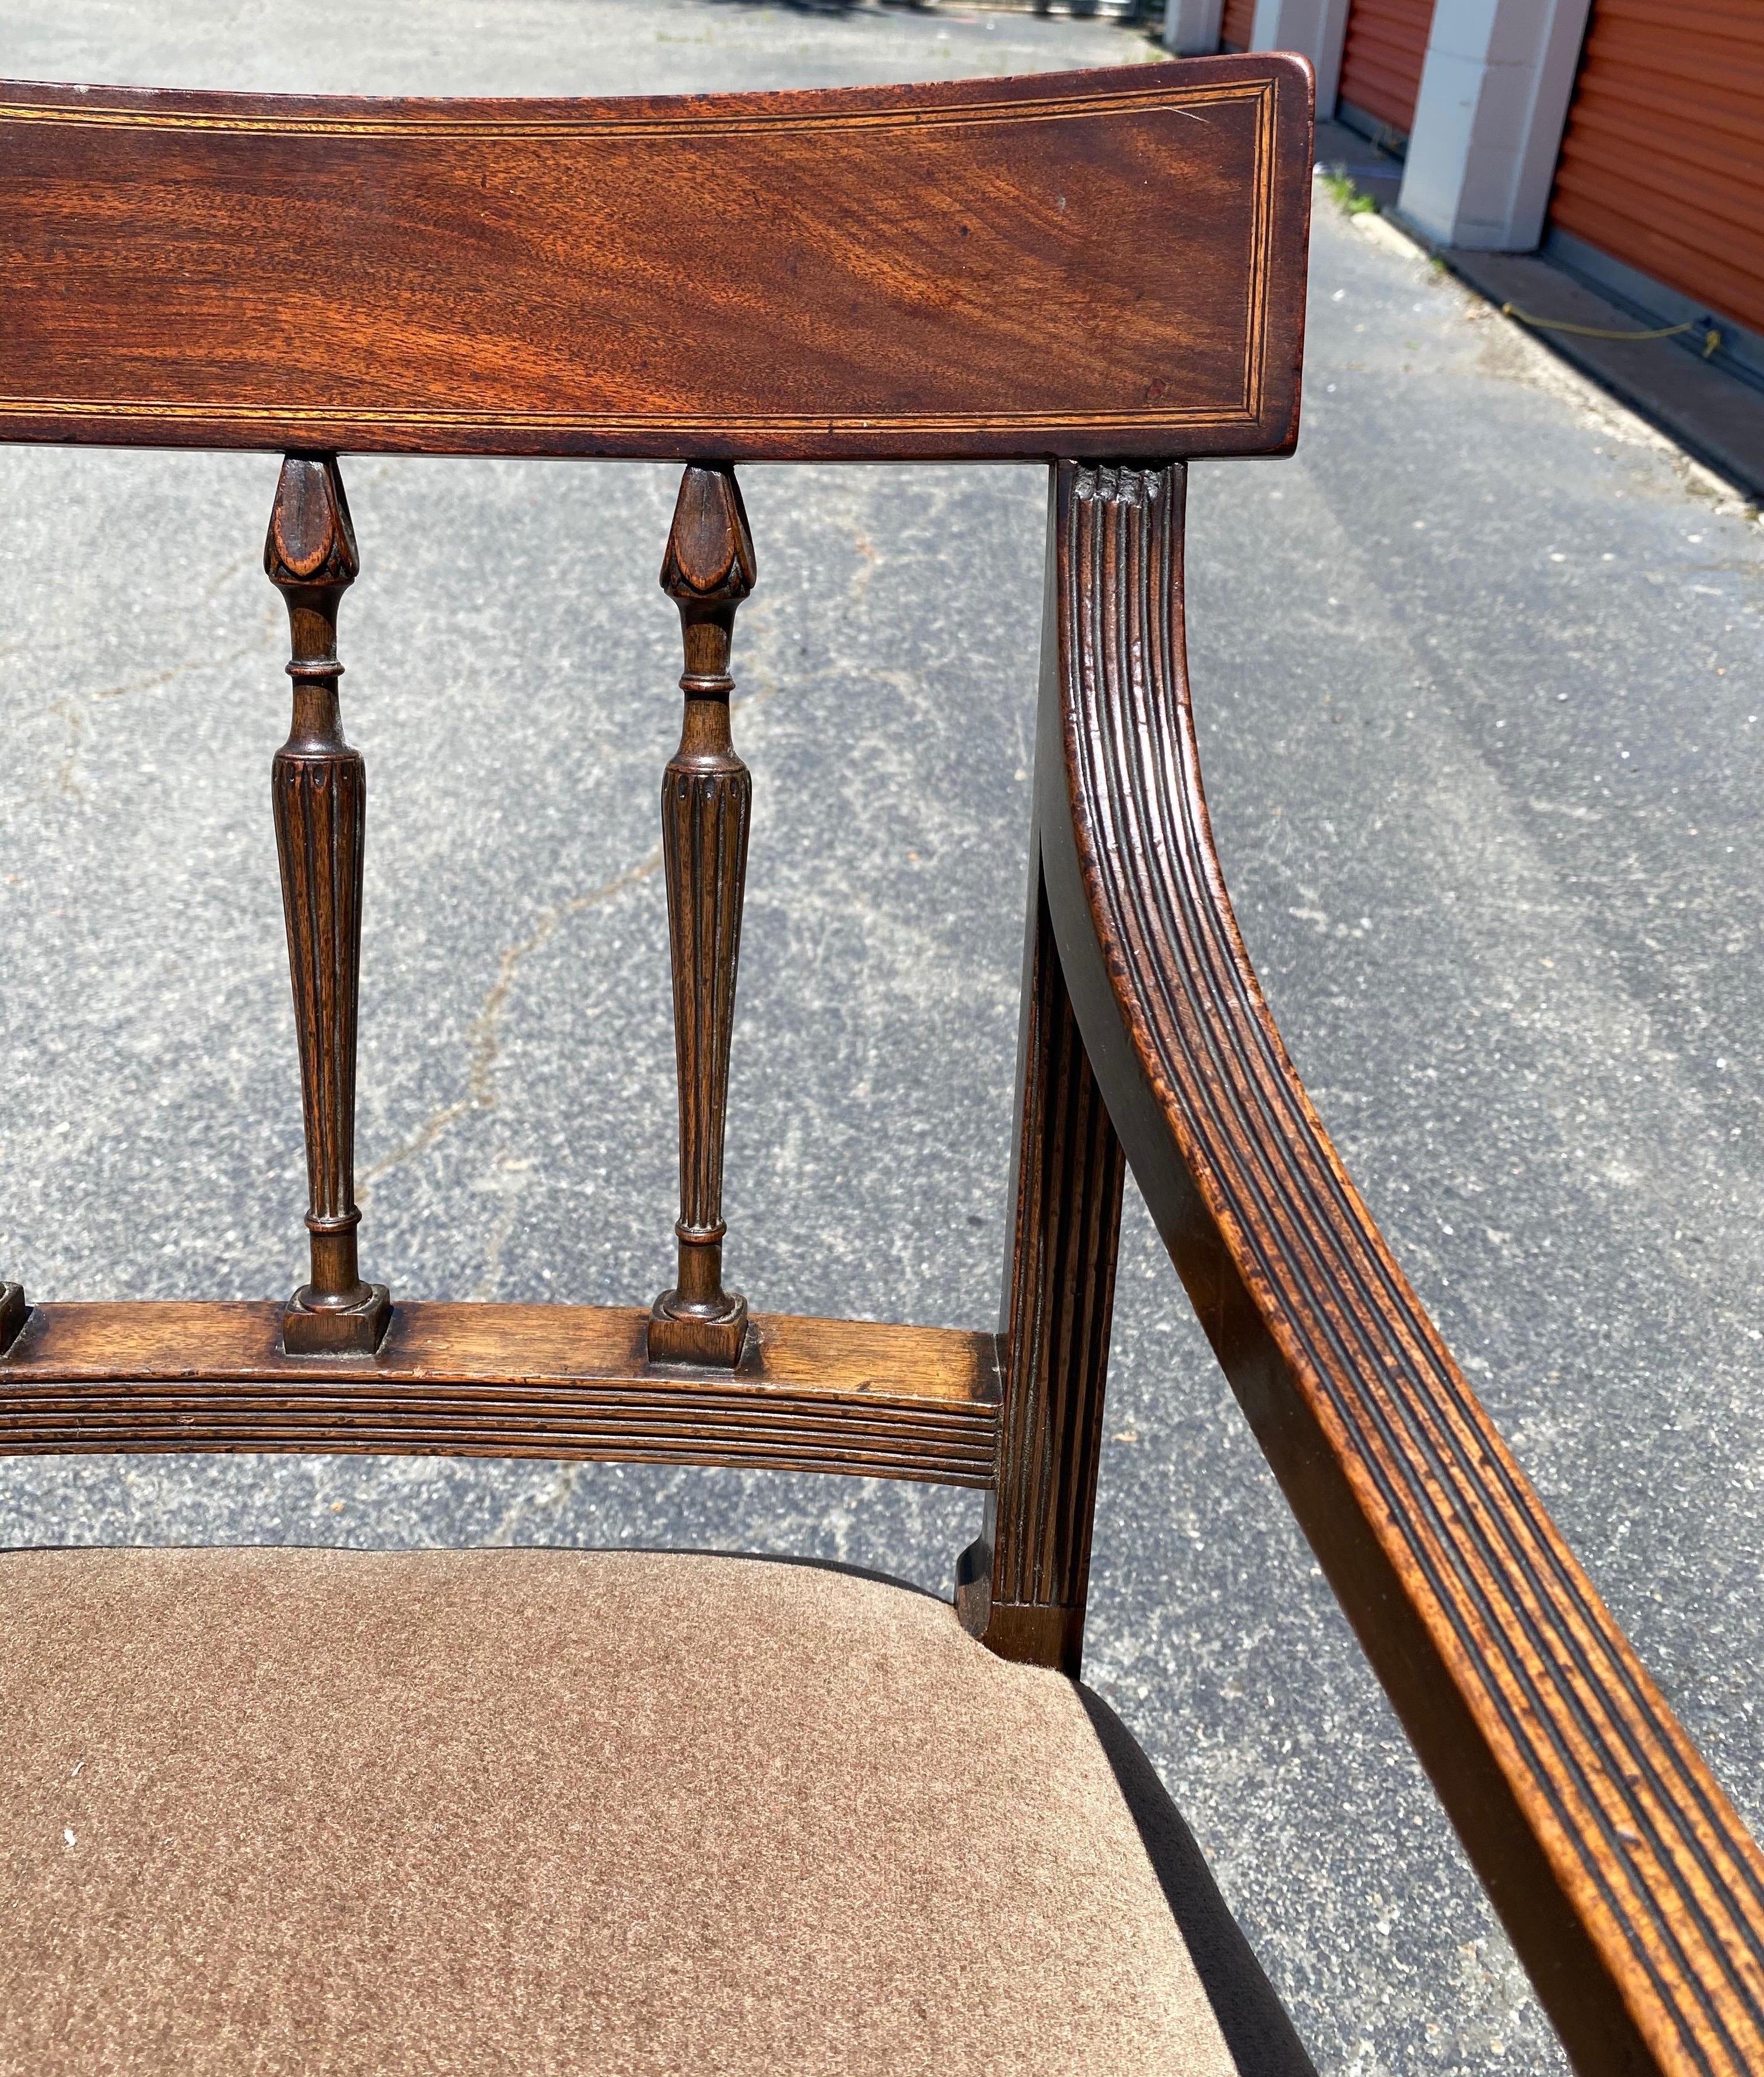 Set of 6 19th century English mahogany chairs with satinwood inlay and mohair fabric. Set consists of 2 arm chairs and 4 side chairs and are in wonderful condition. Tapered legs, reeded arms, and satinwood inlay on the backs. The mohair fabric is in